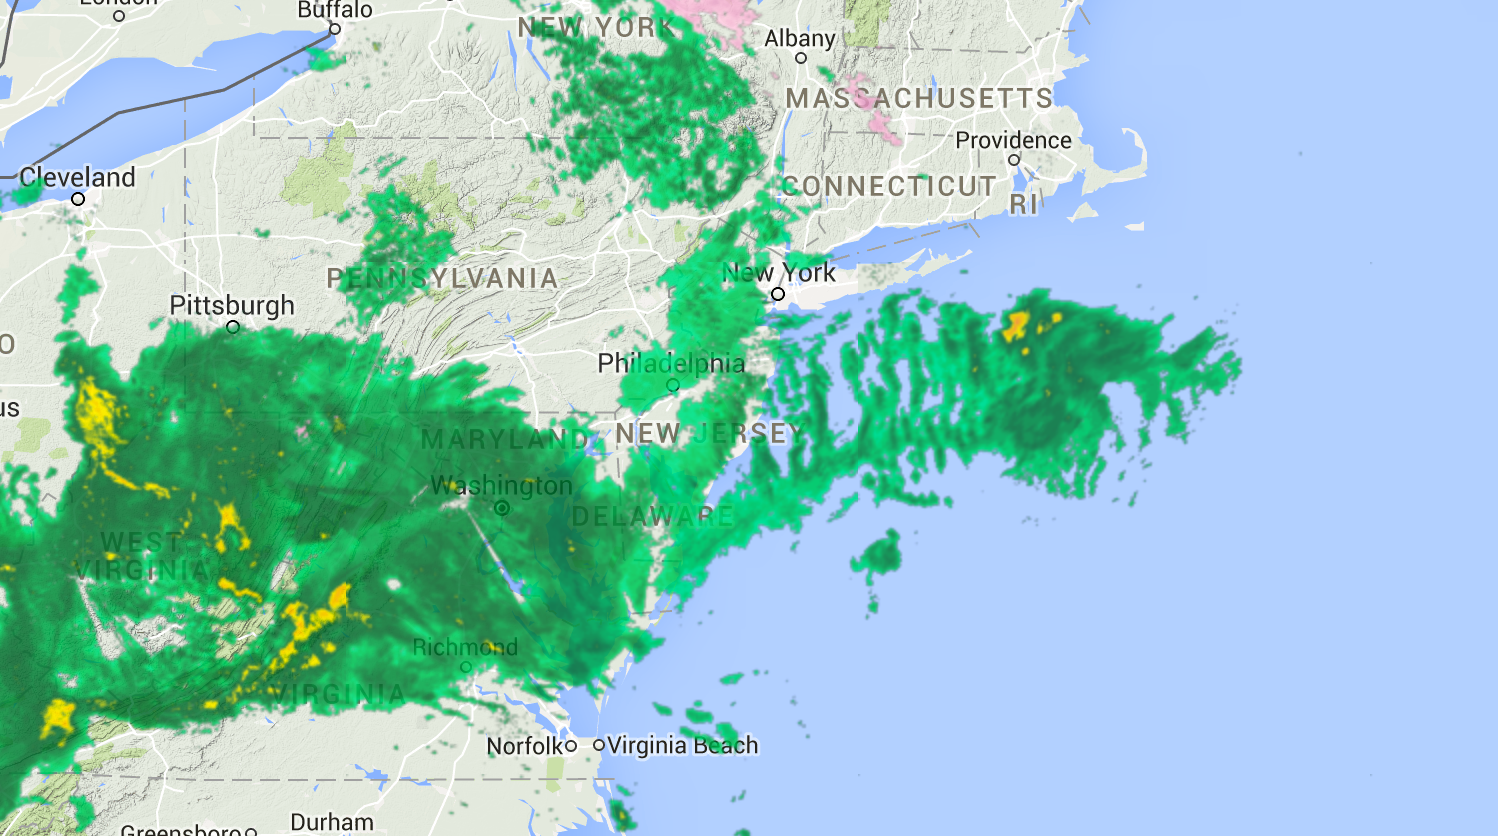  Weather Underground's radar at 9:00 a.m. this morning.  